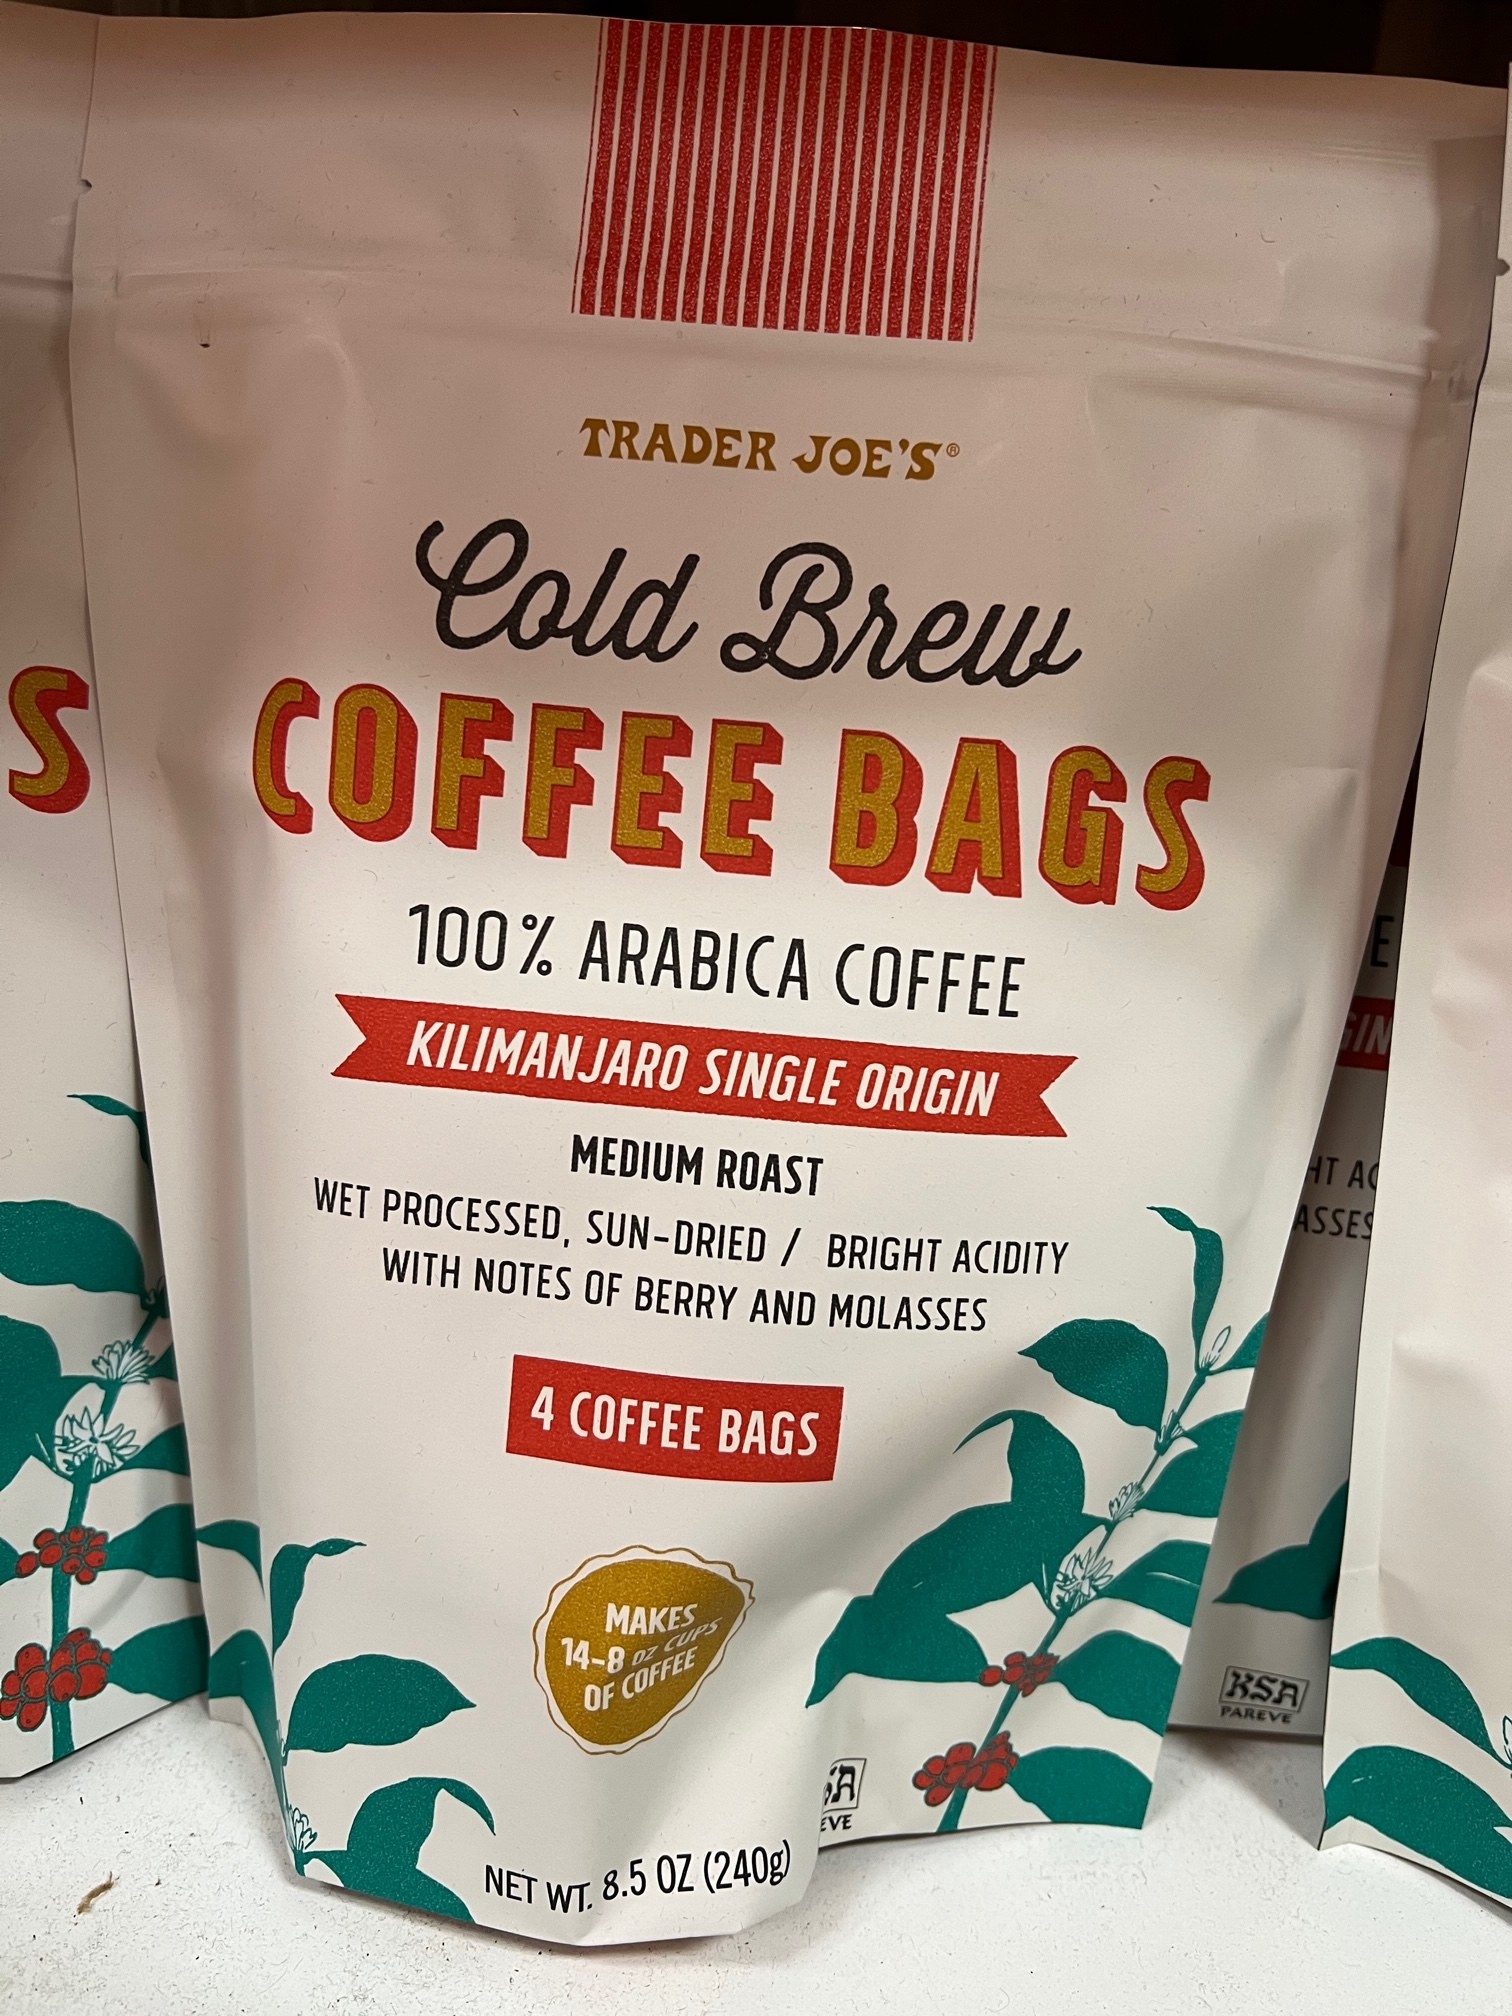 A bag of Cold Brew Coffee Bags